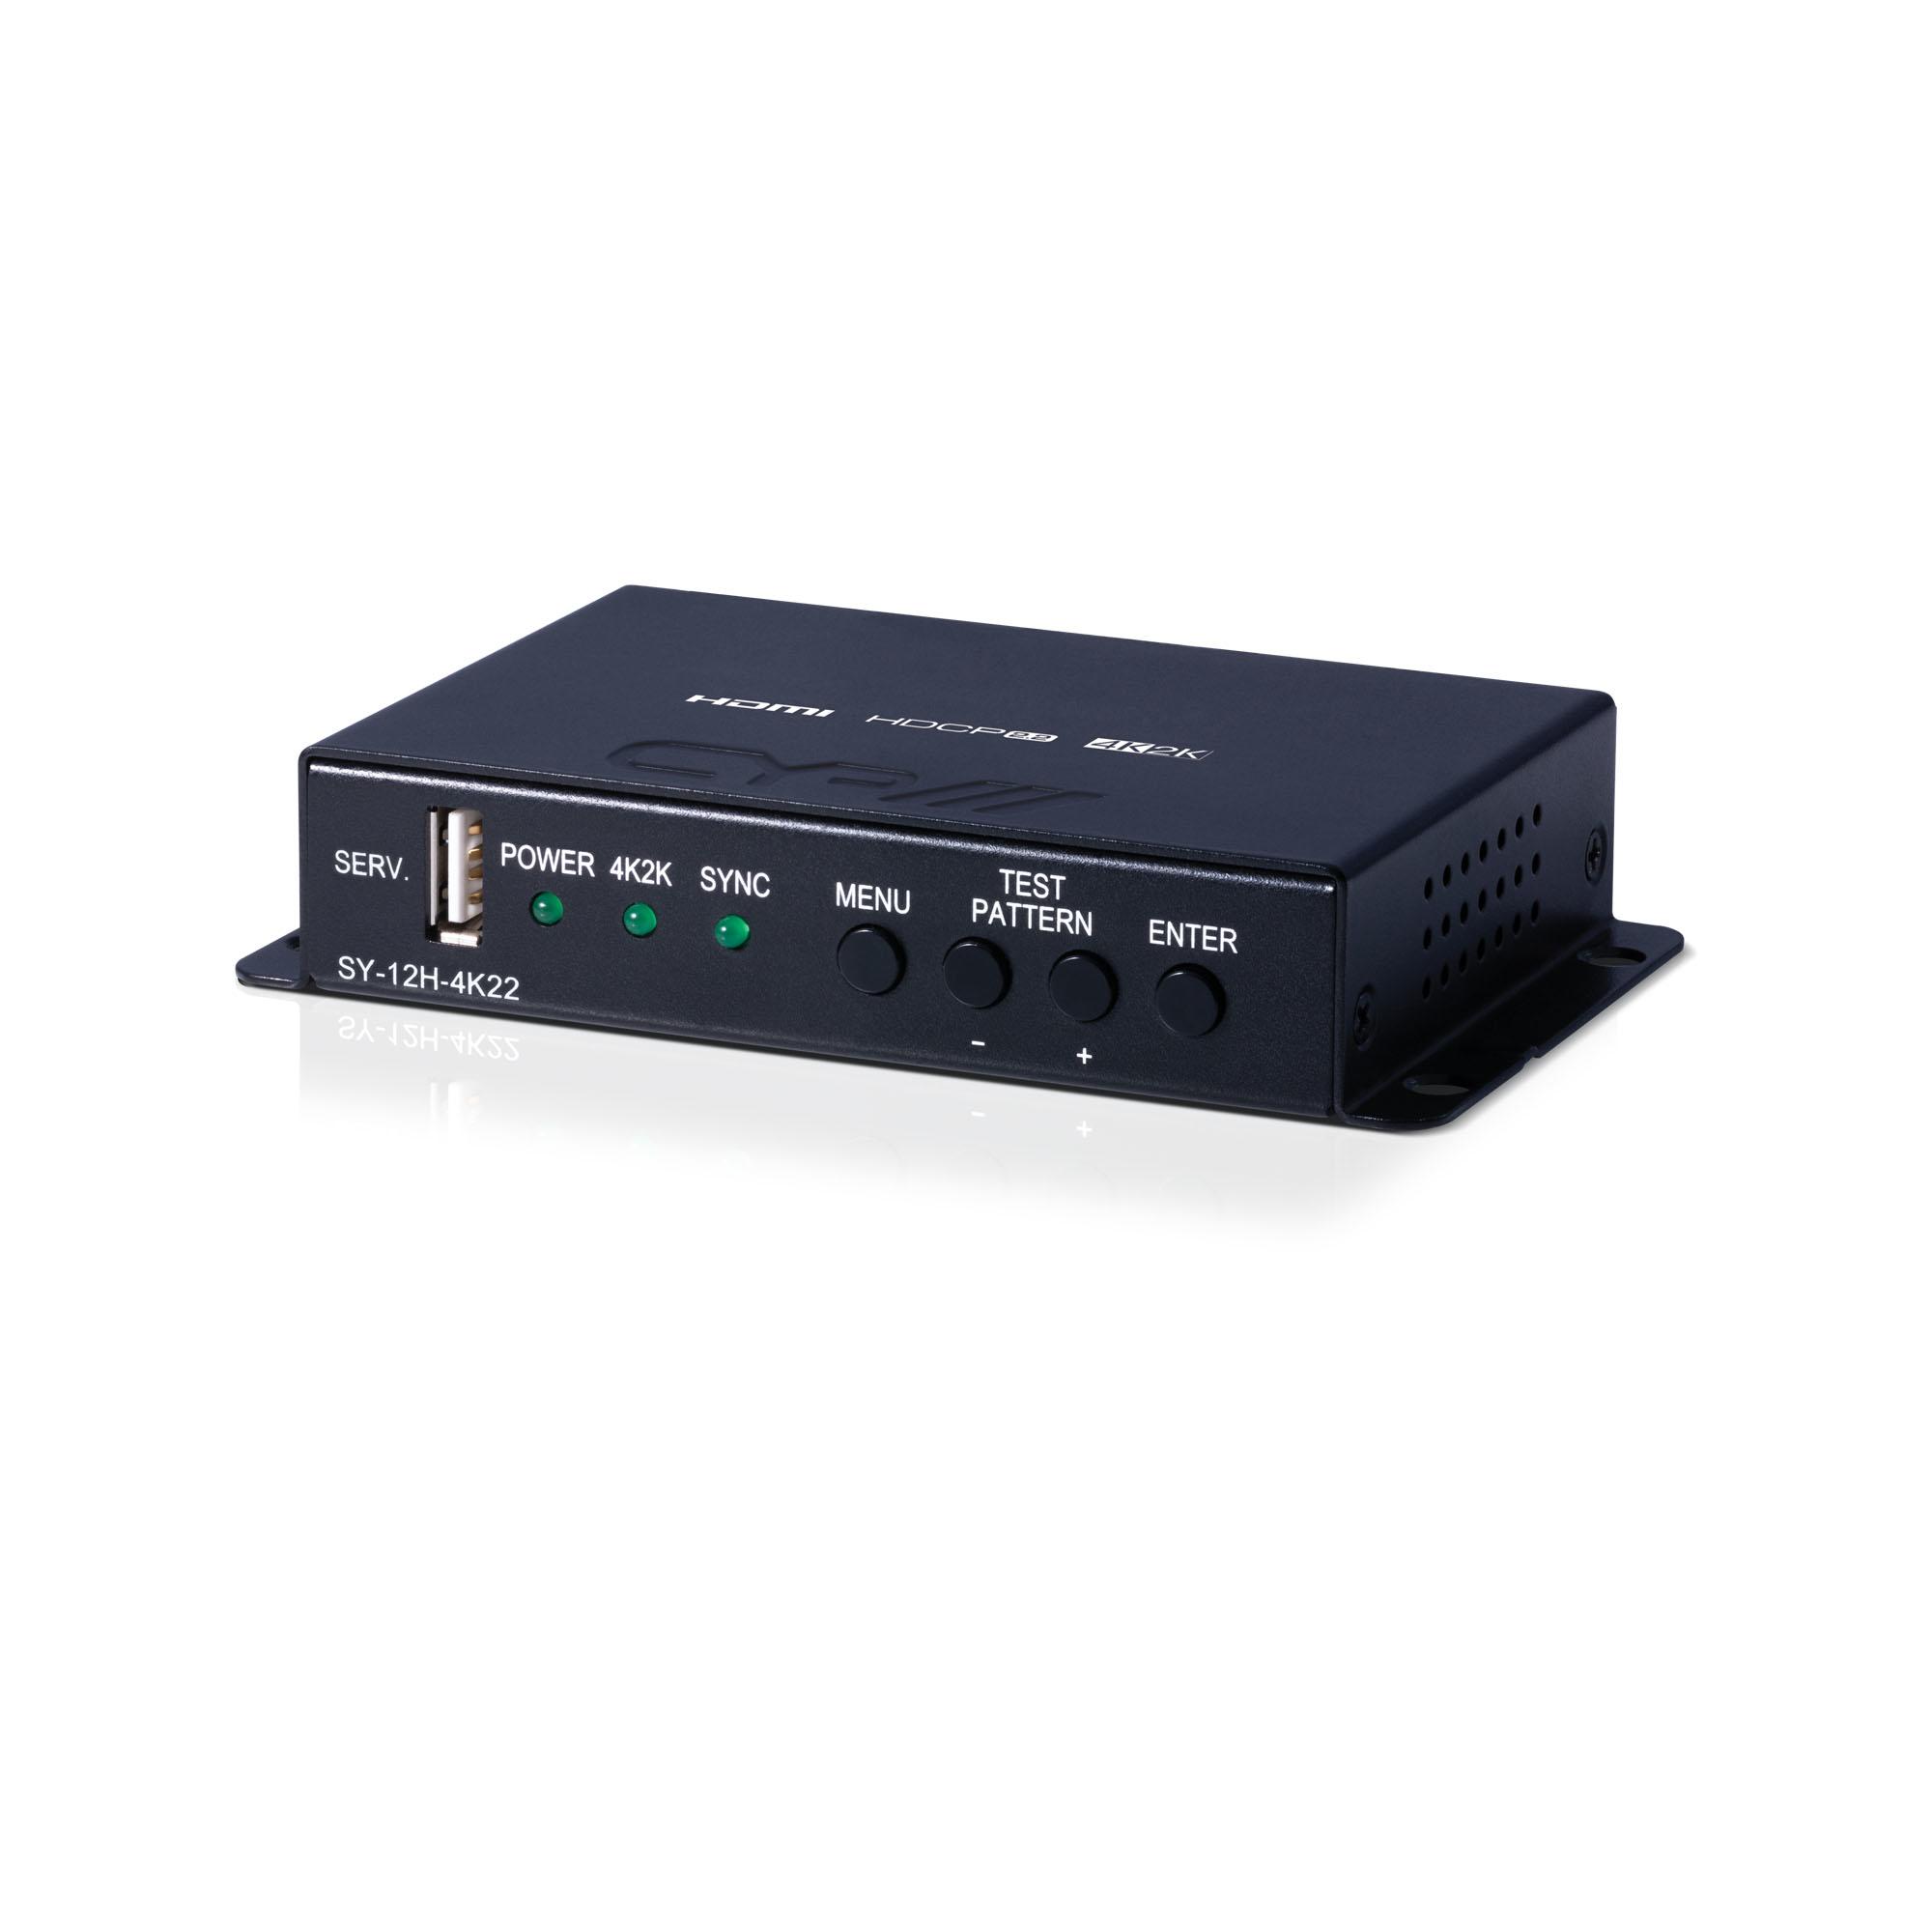 SY-12H-4K22 HDMI 4K Scaler with Dual outputs & HDCP Converter (4K, HDCP2.2, HDMI2.0)